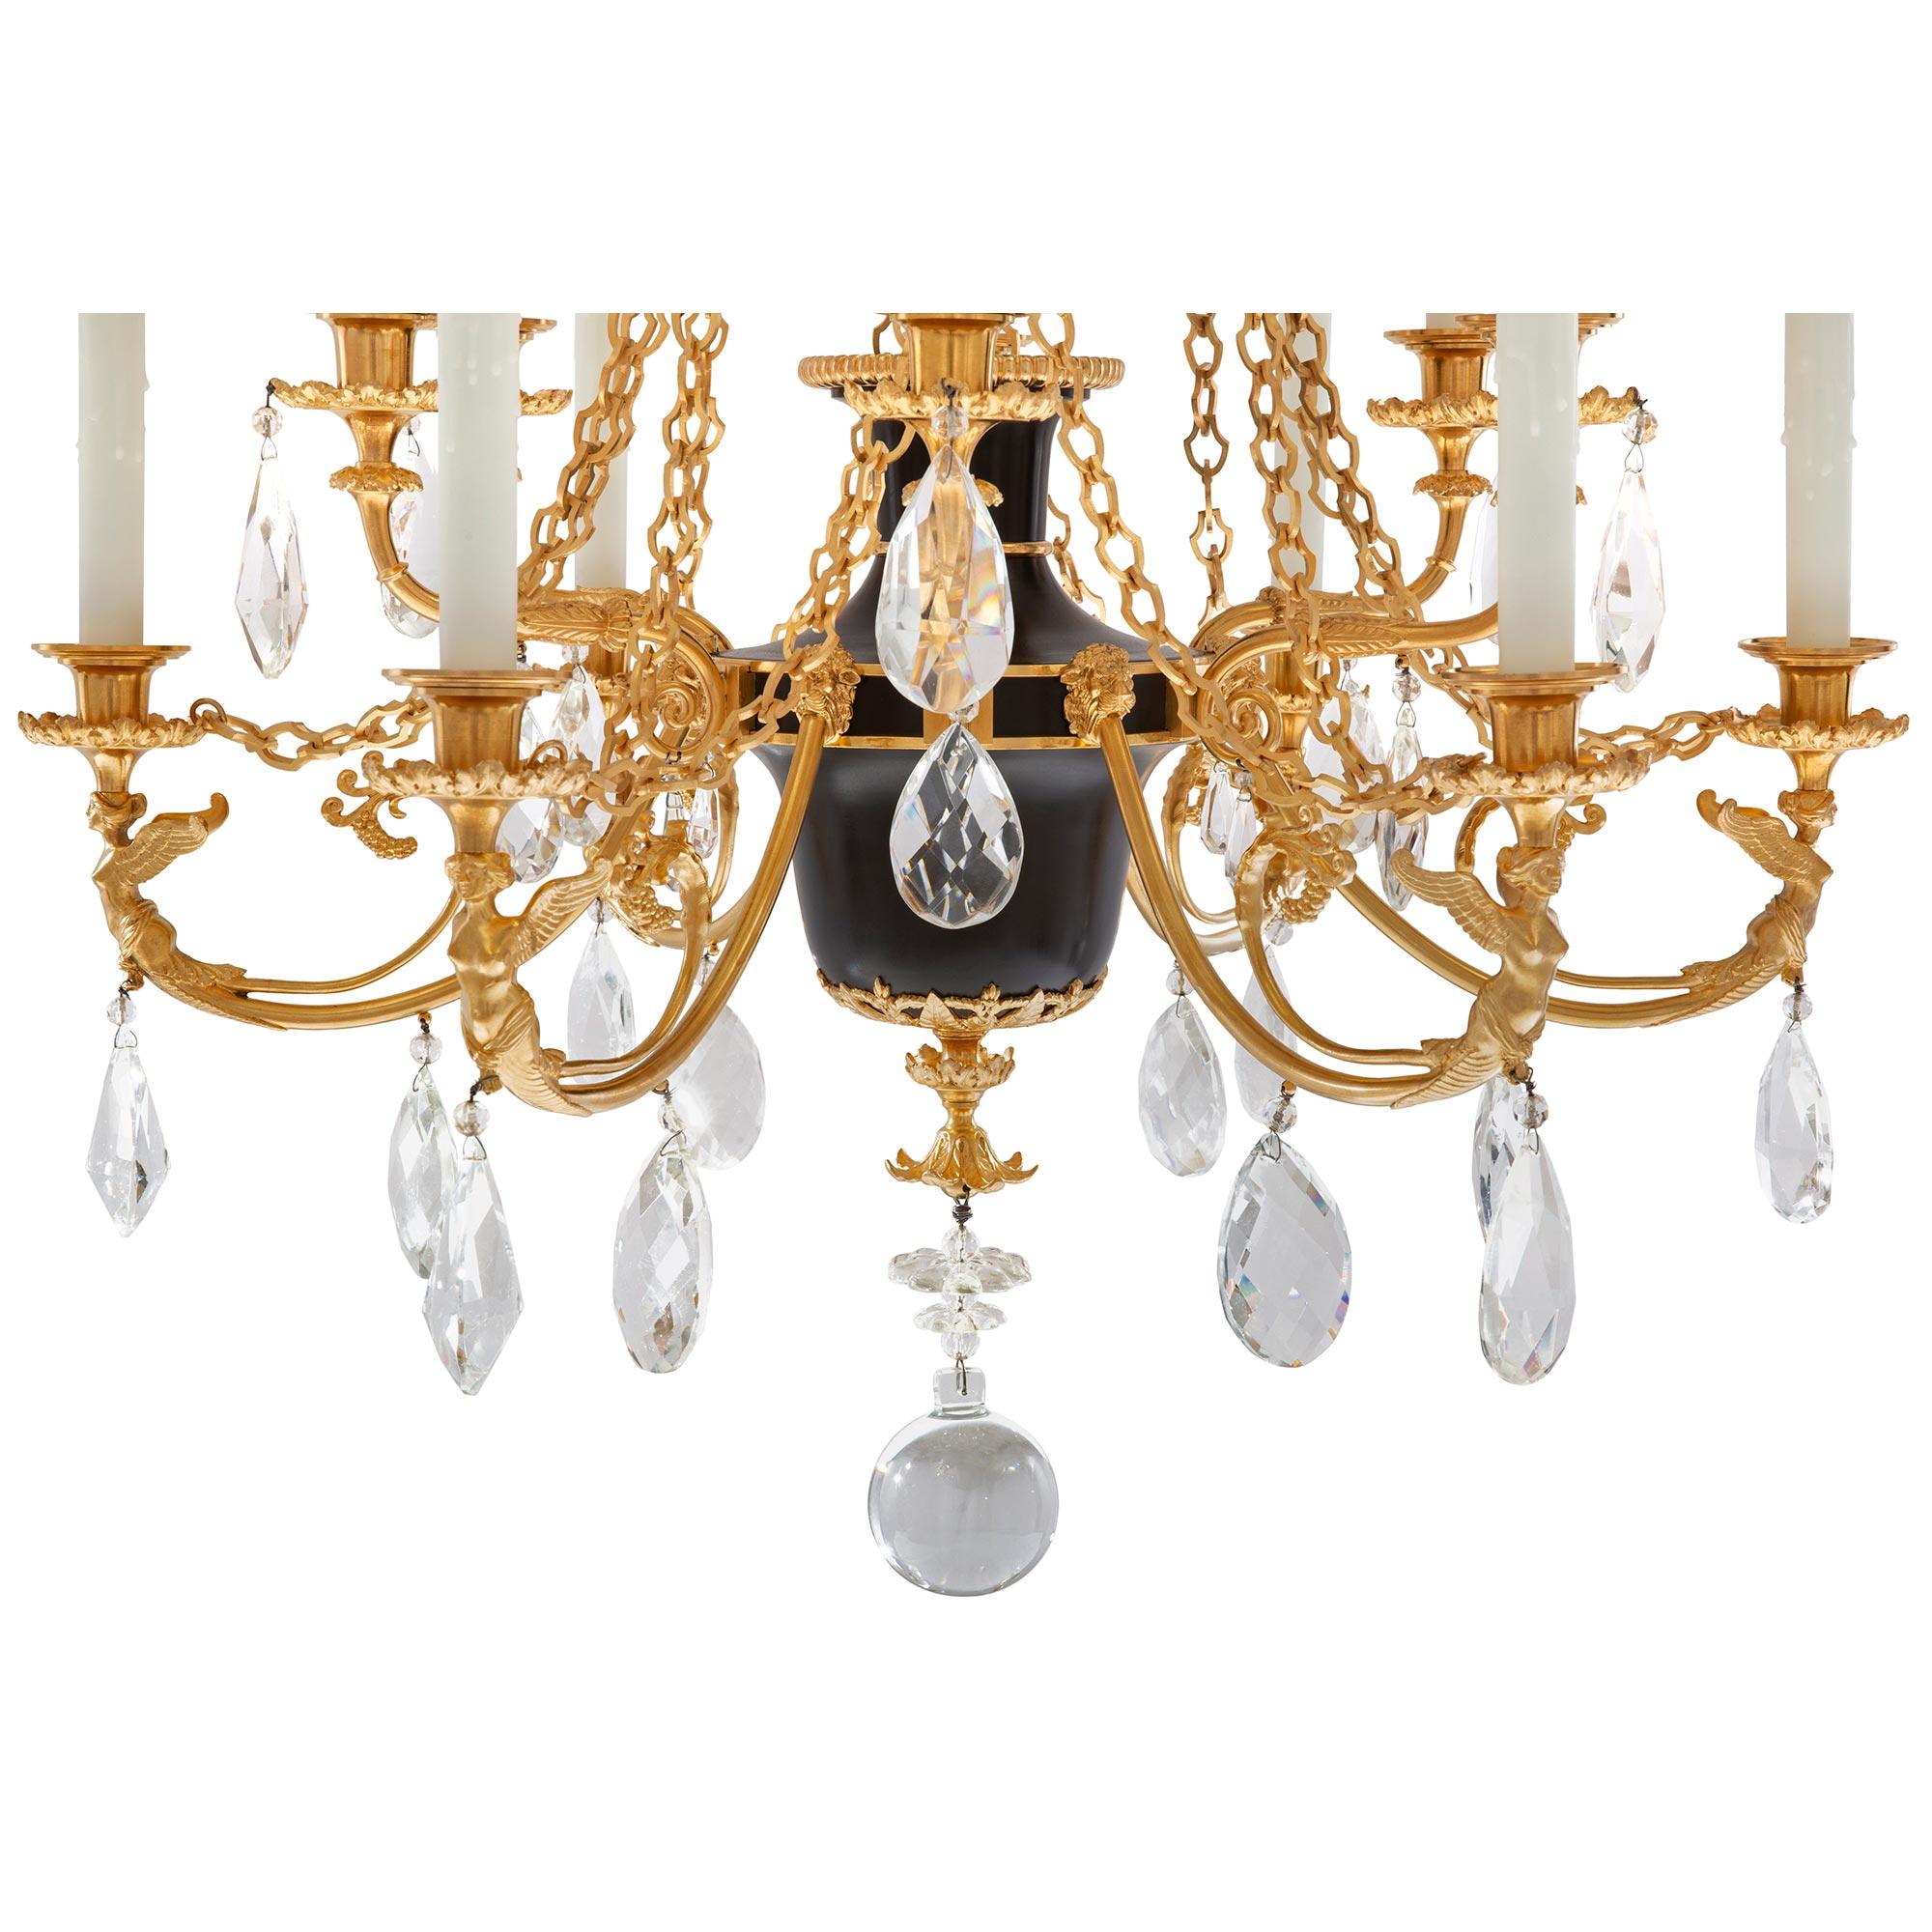 Russian 19th Century Empire St. Patinated Bronze, Crystal, and Ormolu Chandelier For Sale 5